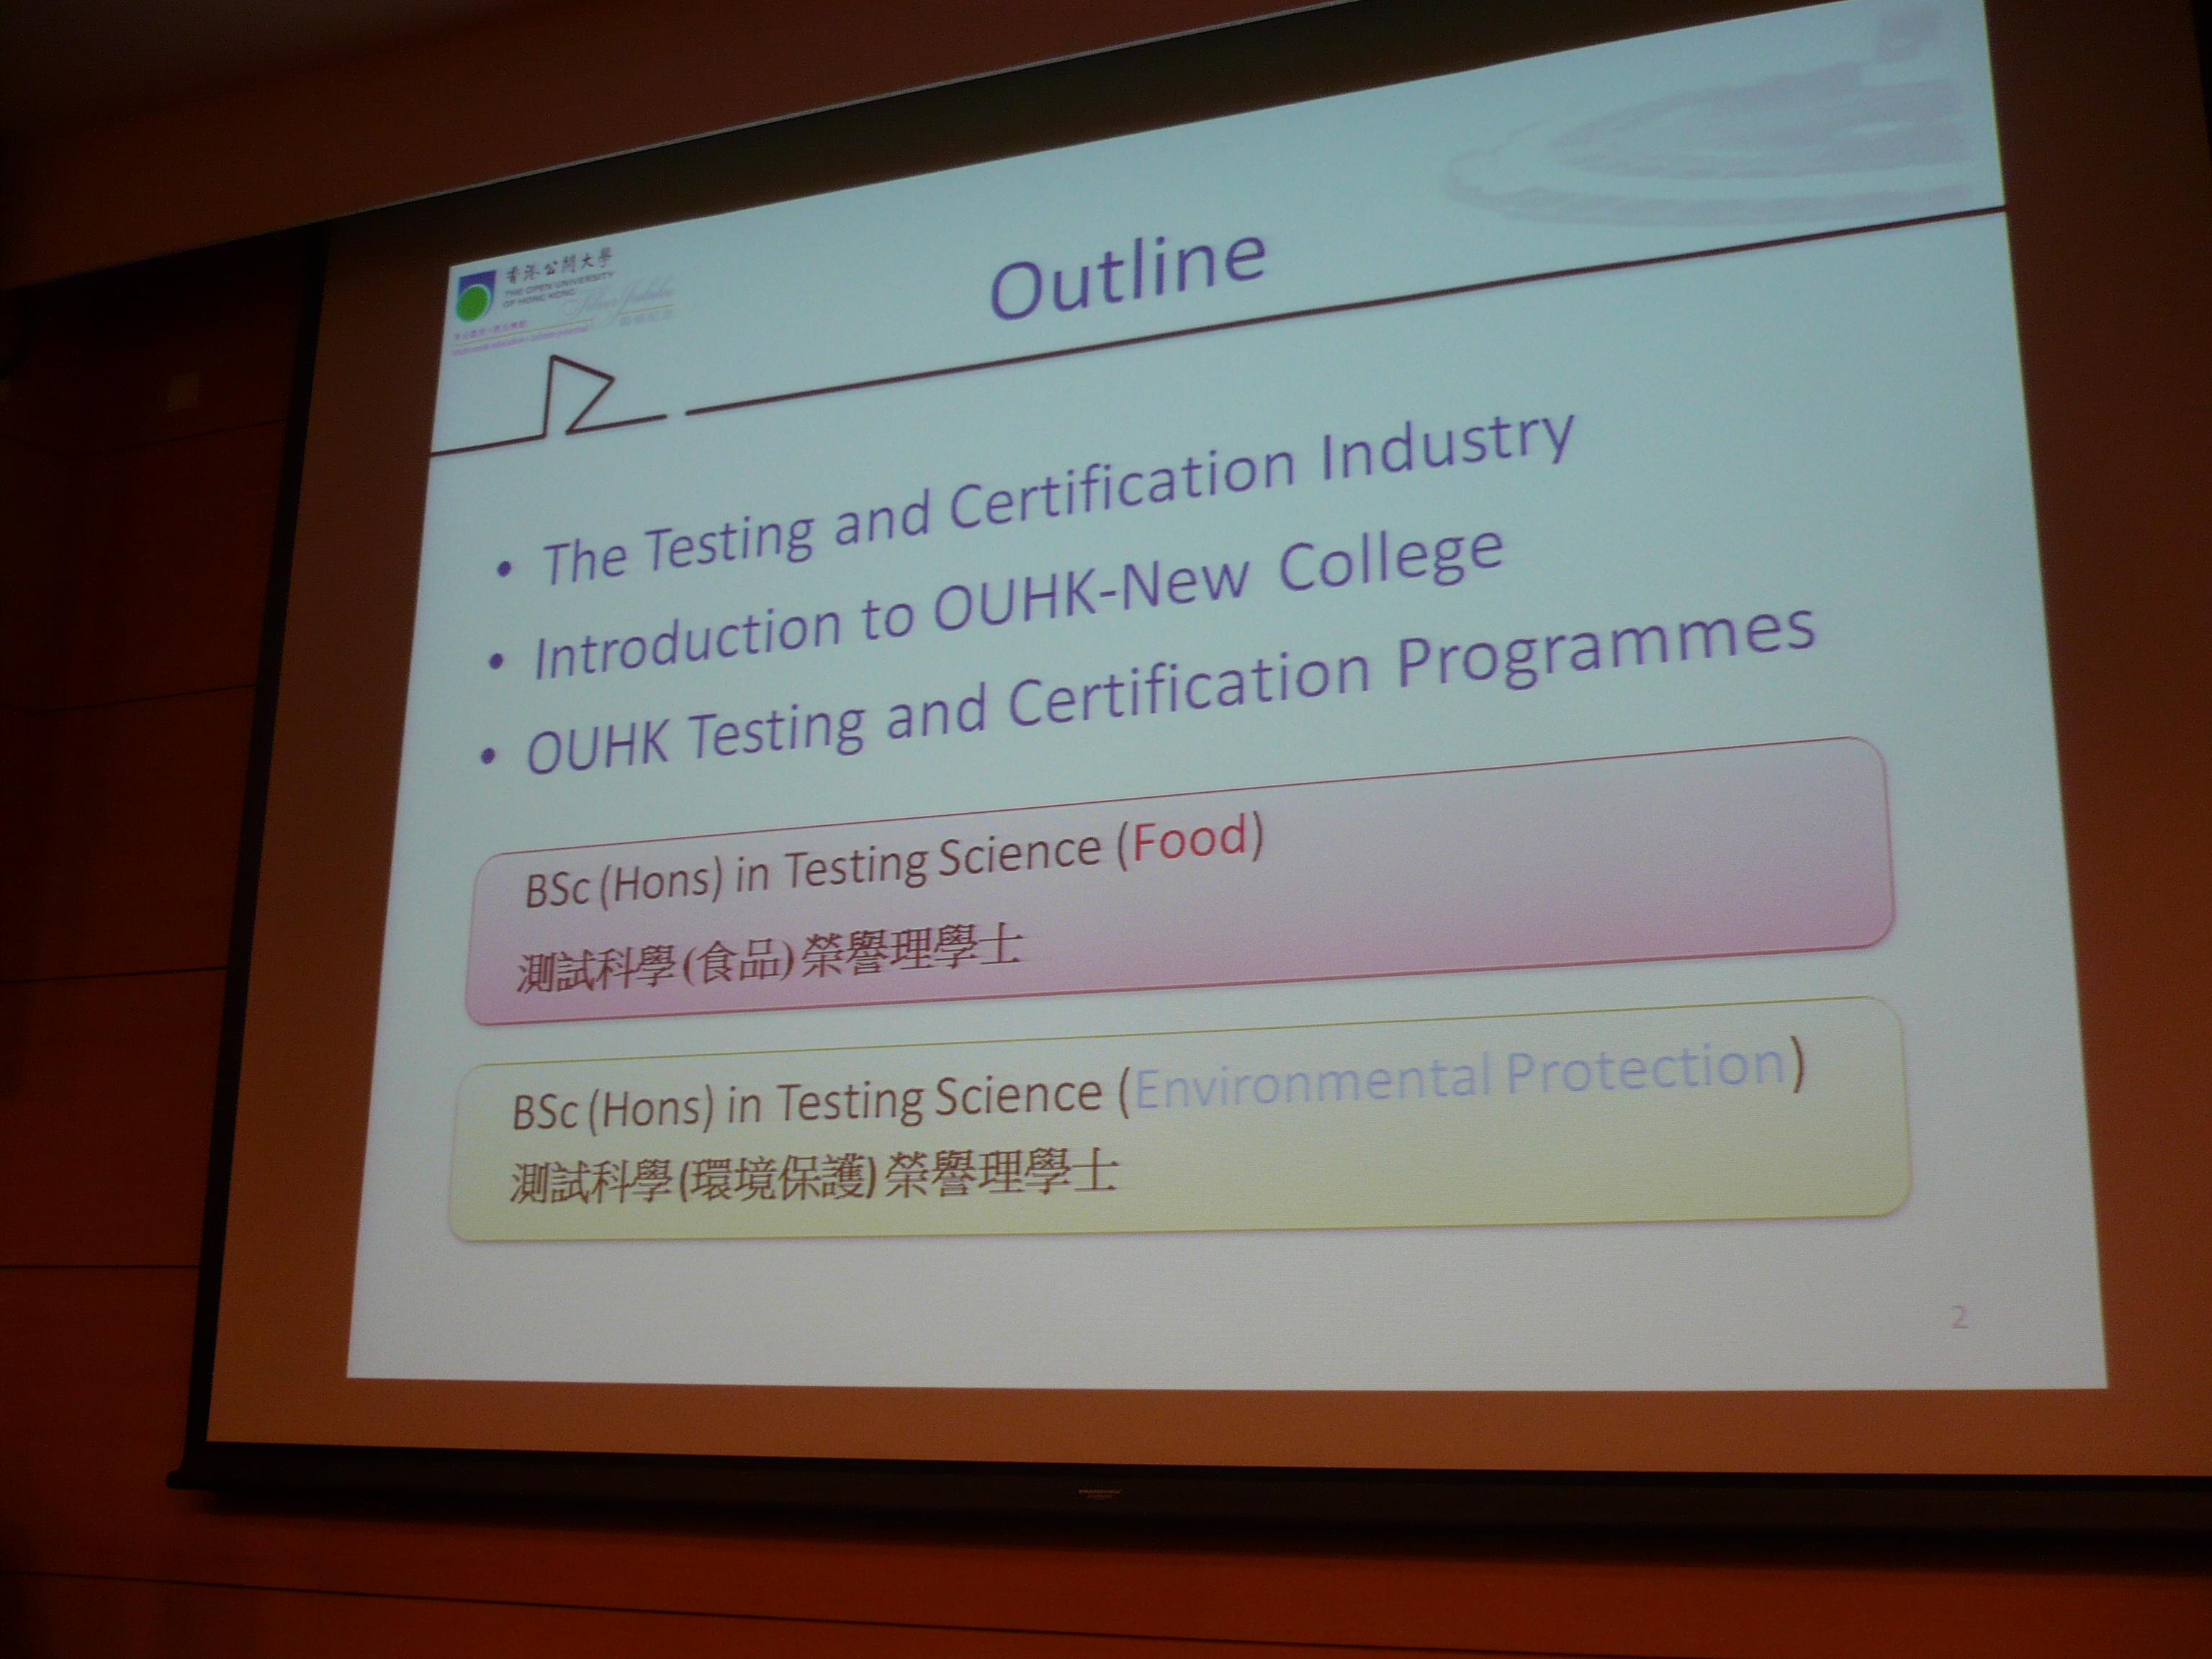 Seminar on the BSc in Testing Science/Testing and Certification Programmes (OUHK) - Photo - 1